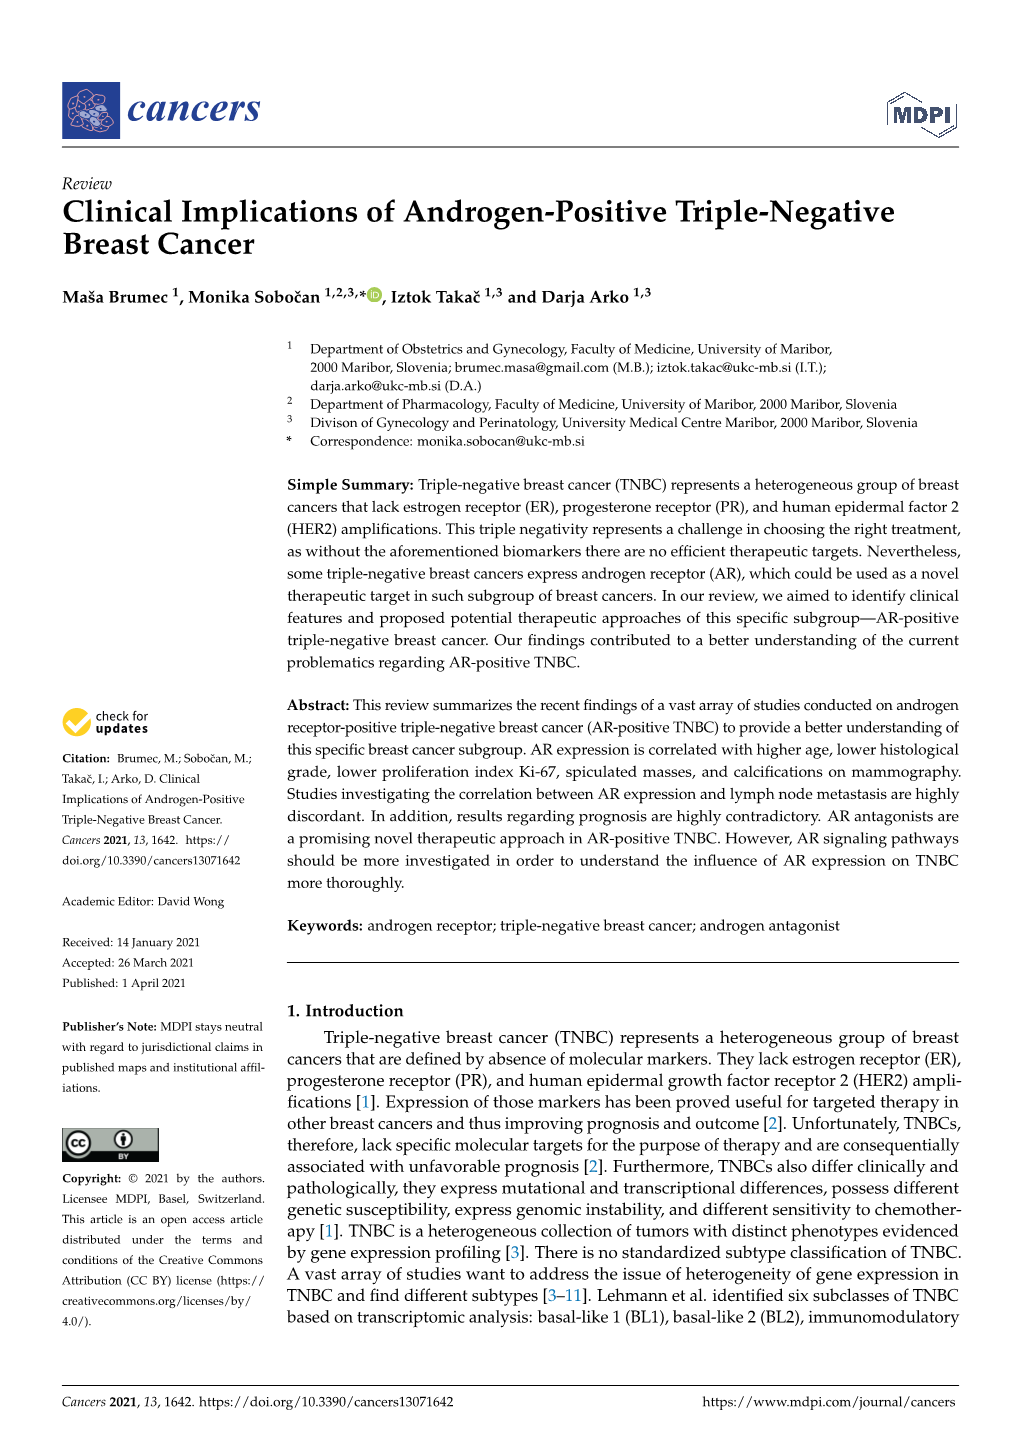 Clinical Implications of Androgen-Positive Triple-Negative Breast Cancer